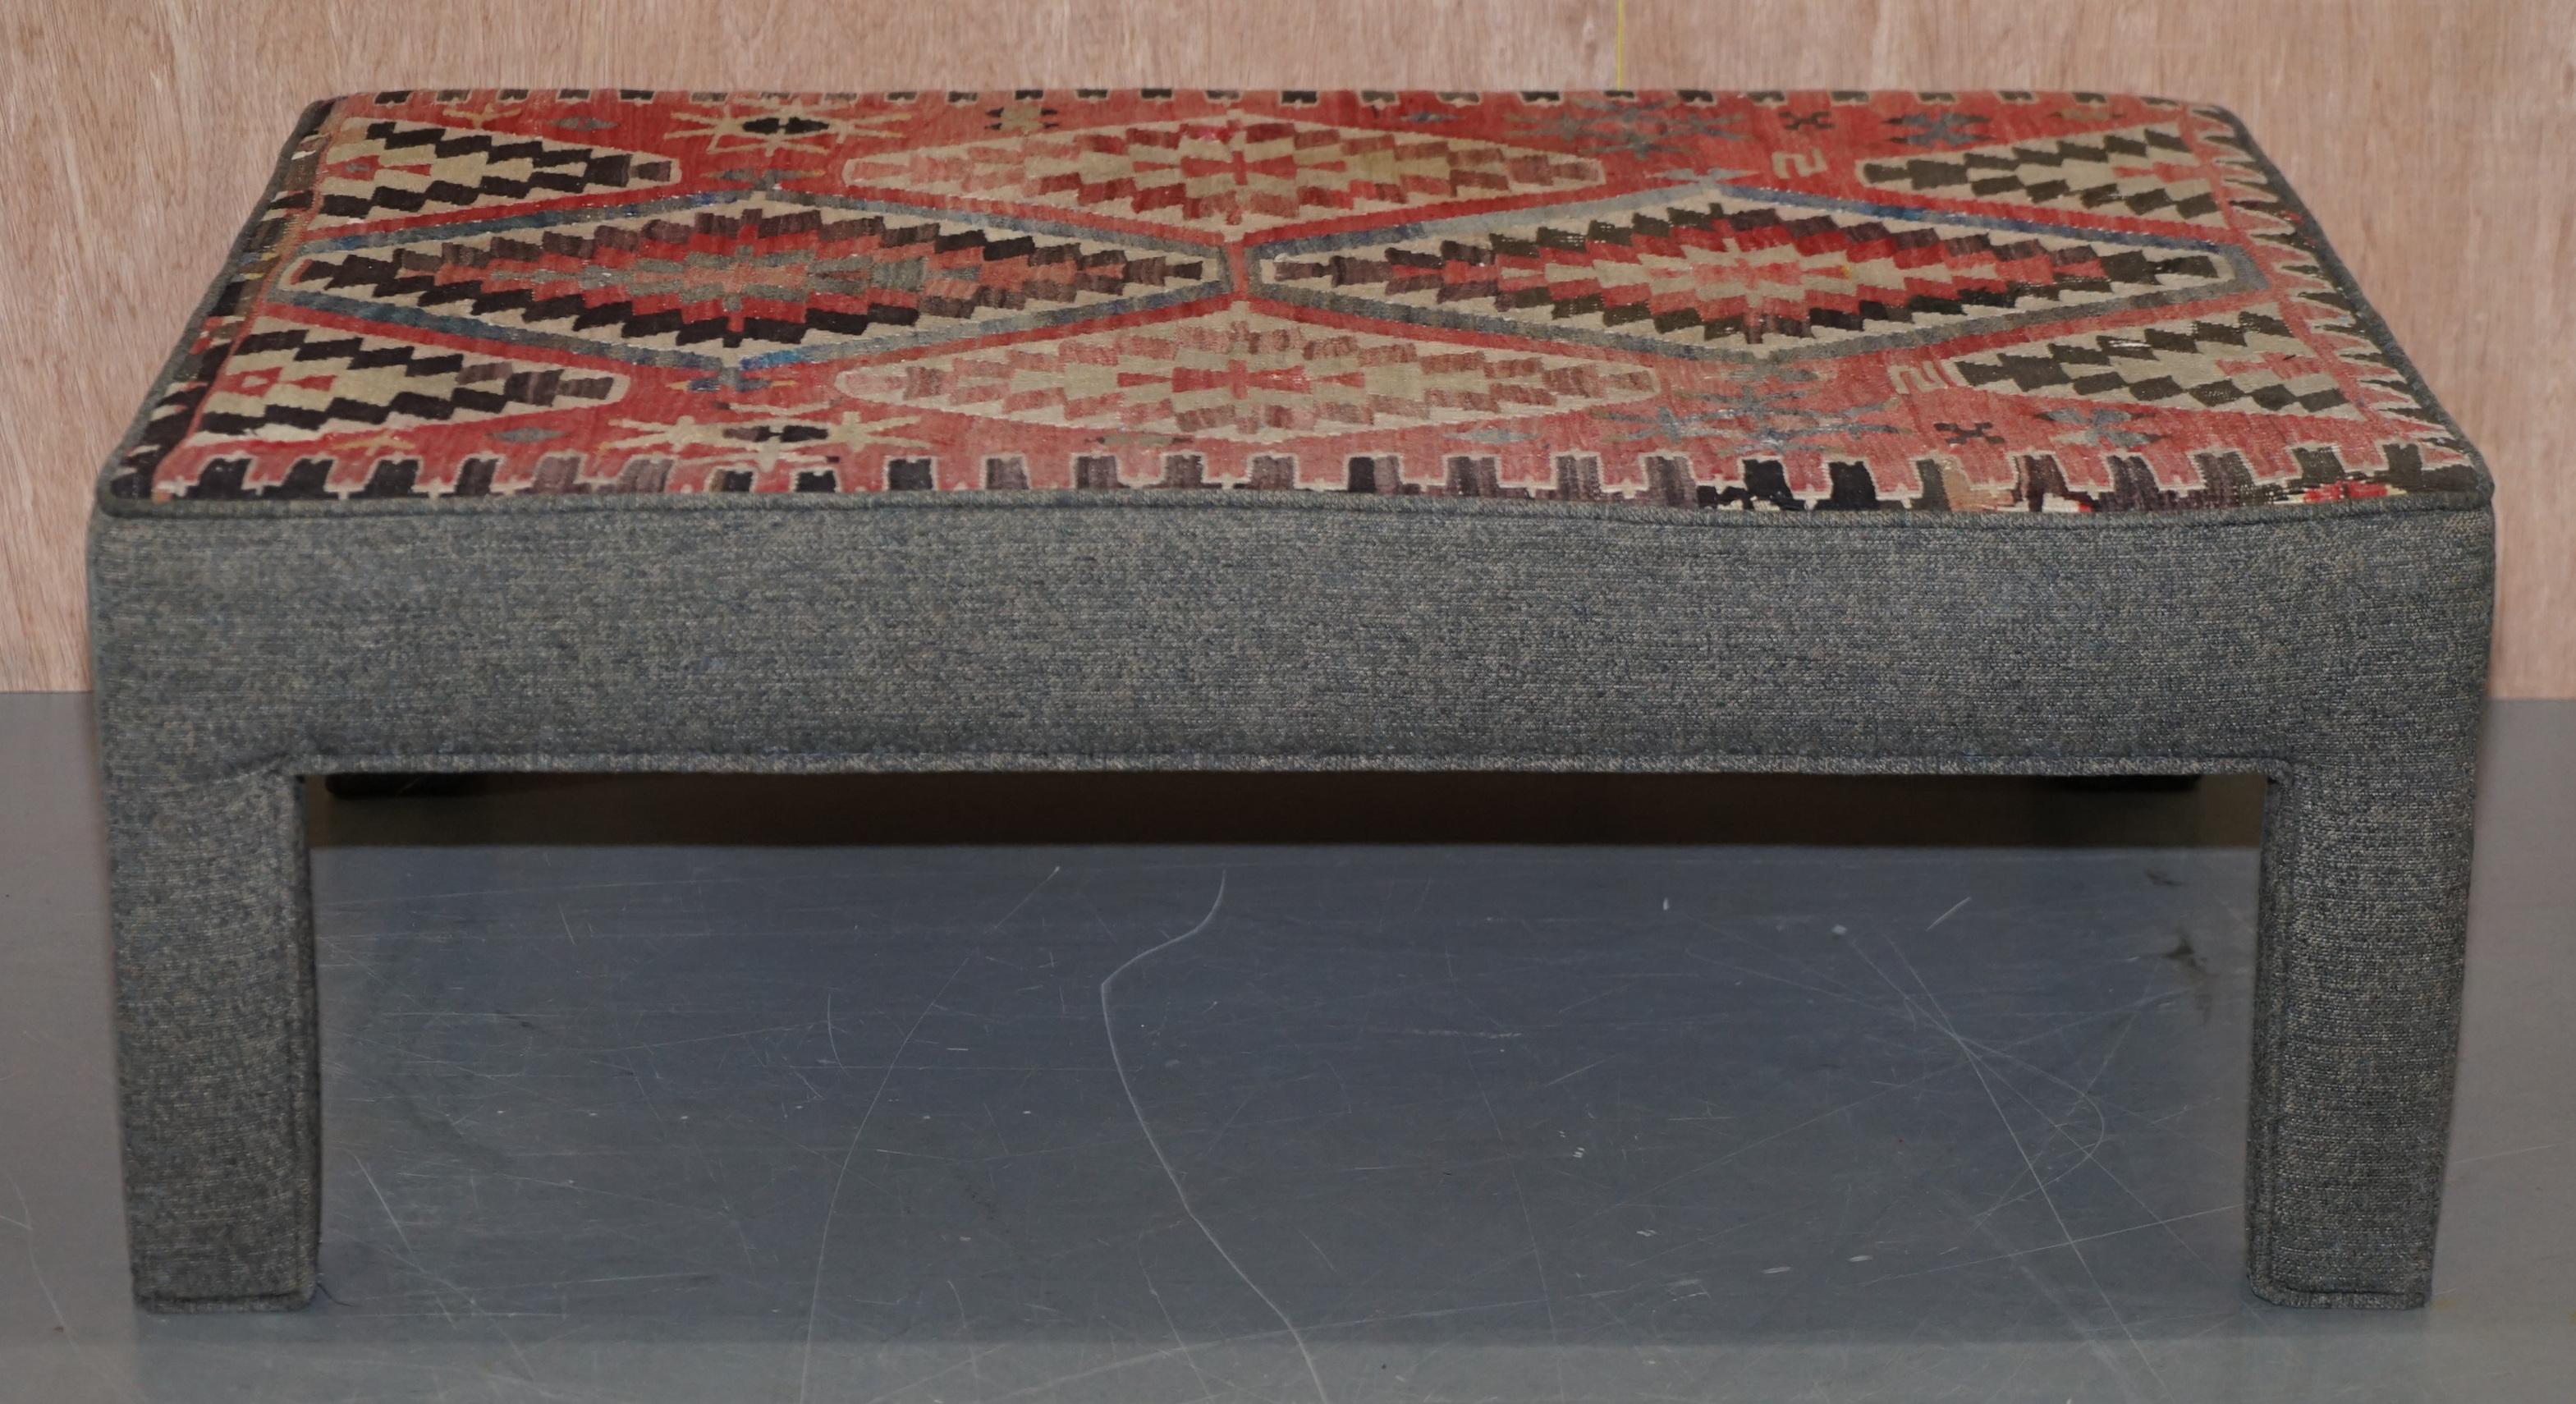 Vintage Kilim Upholstered Bench Ottoman Footstool Can Be Used as Coffee Table 3